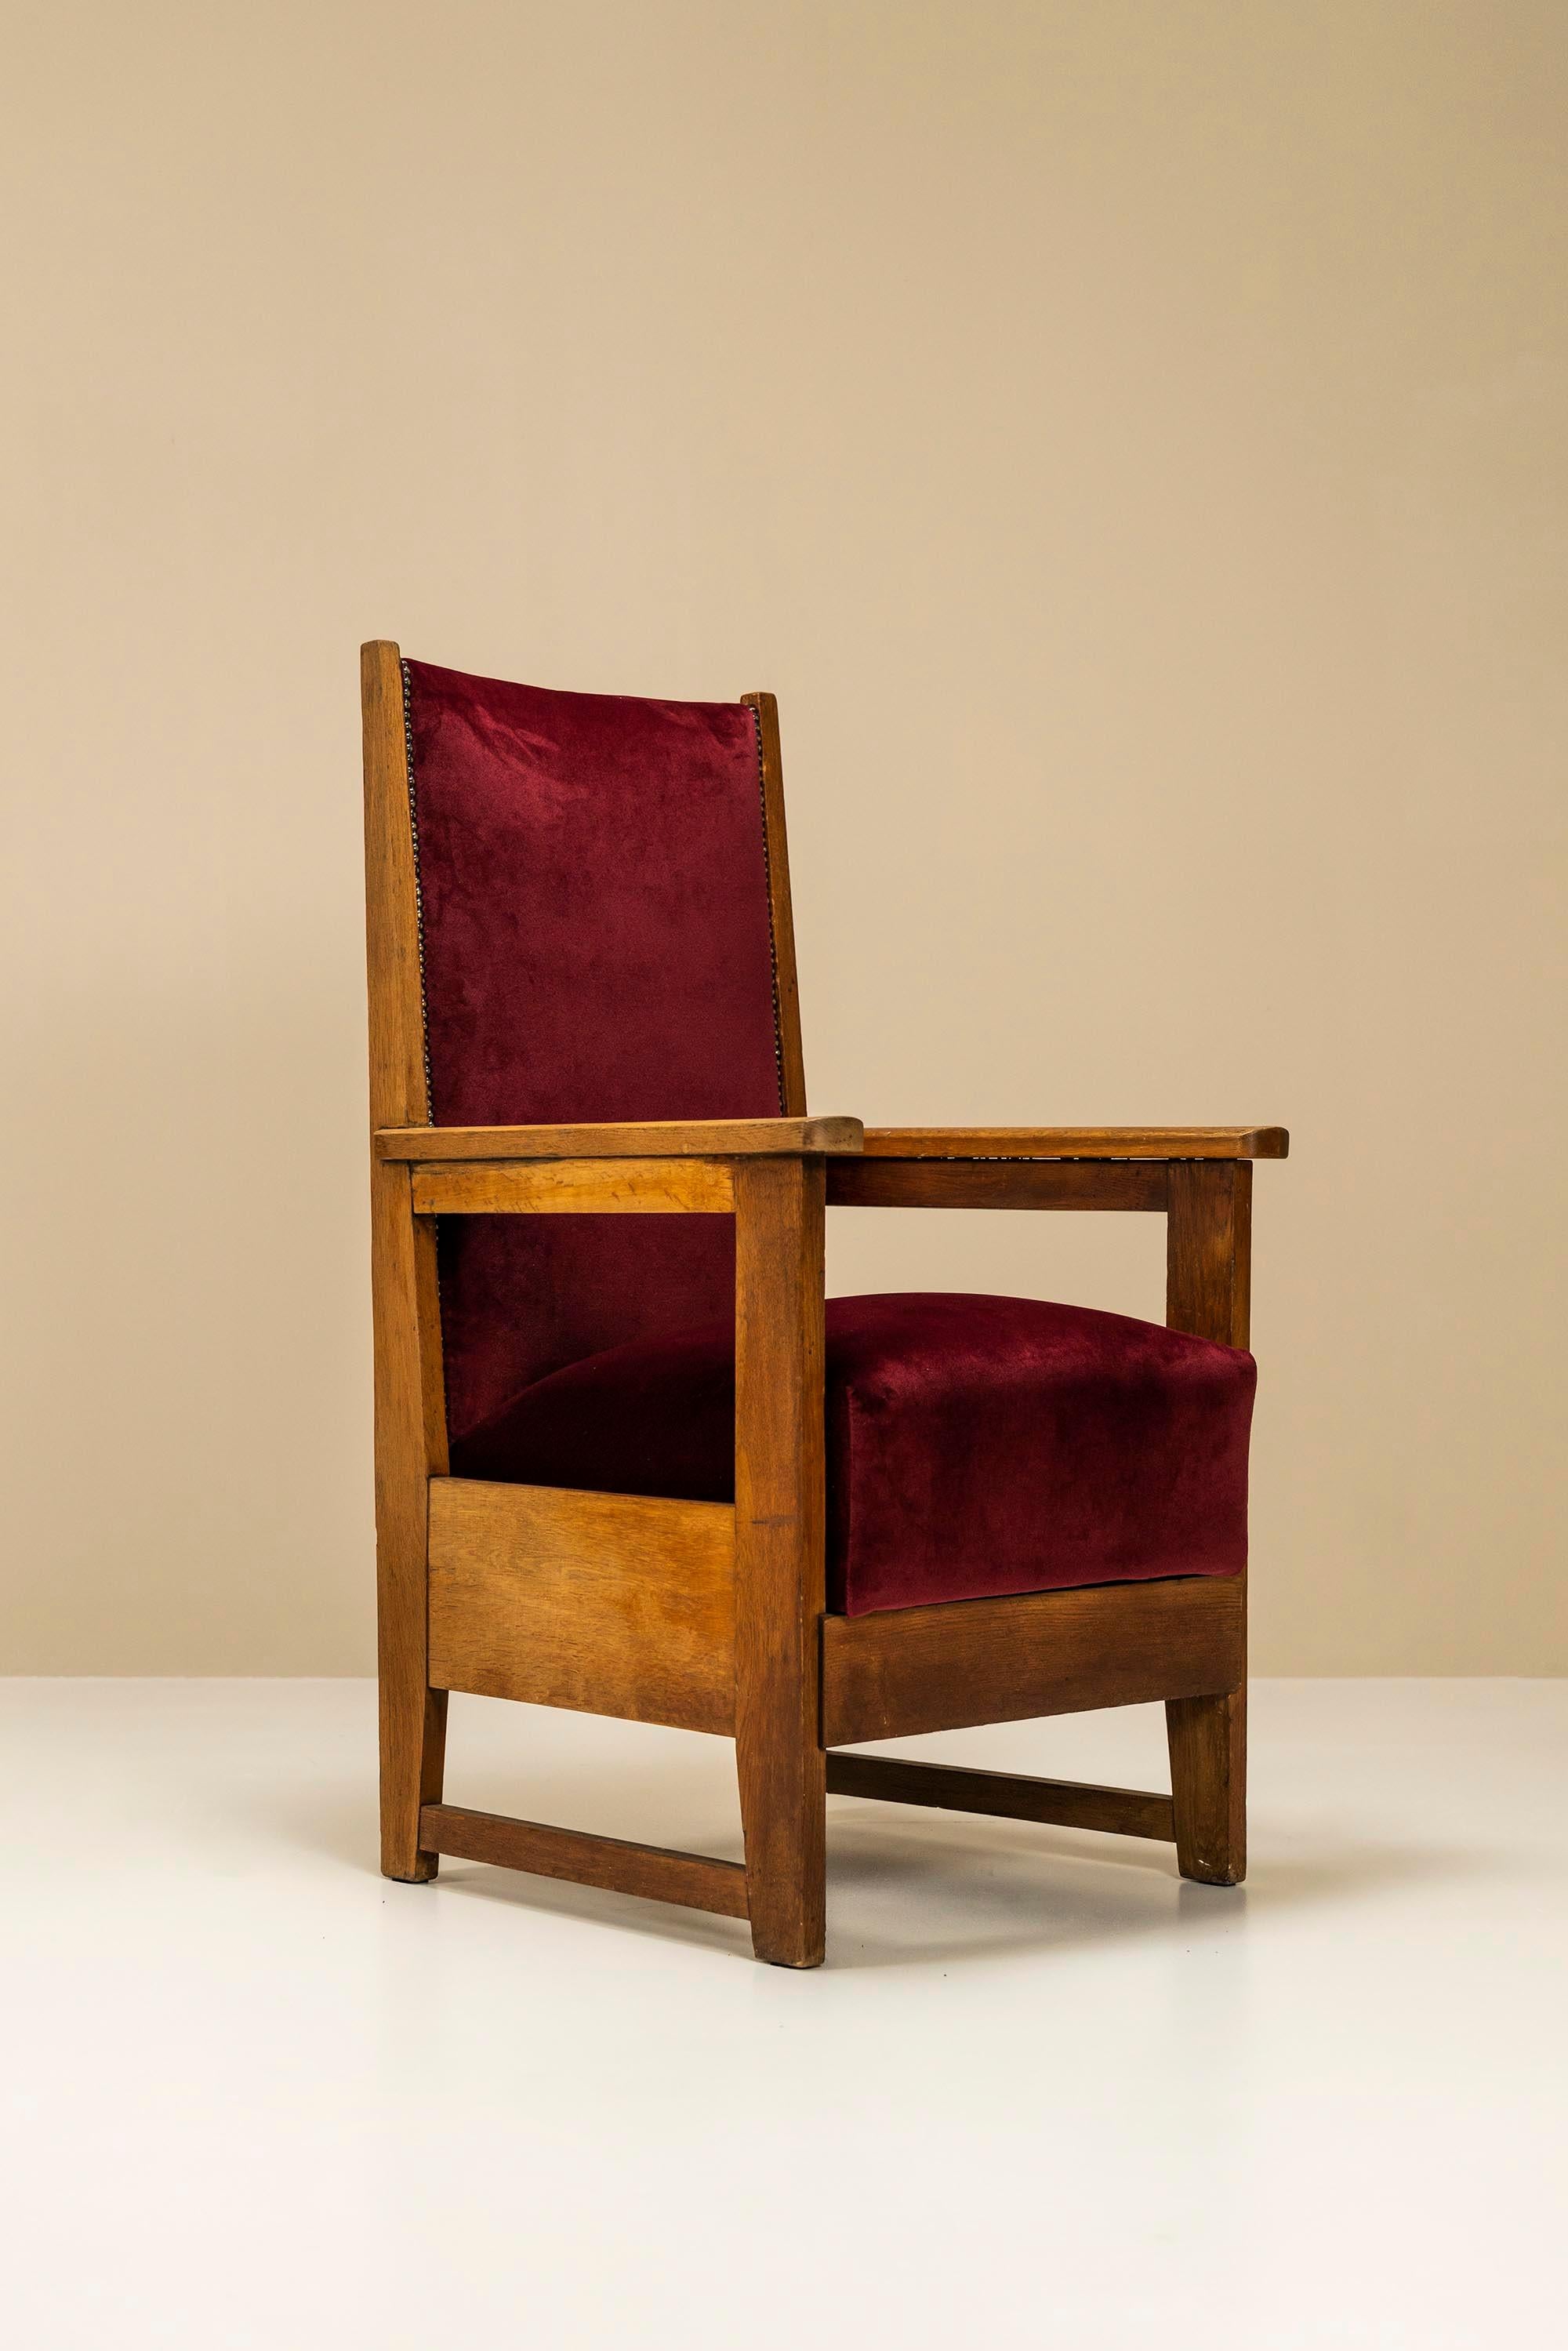 Dutch Two Amsterdam School High Back Chairs in Oak and Burgundy, Netherlands 1930s For Sale